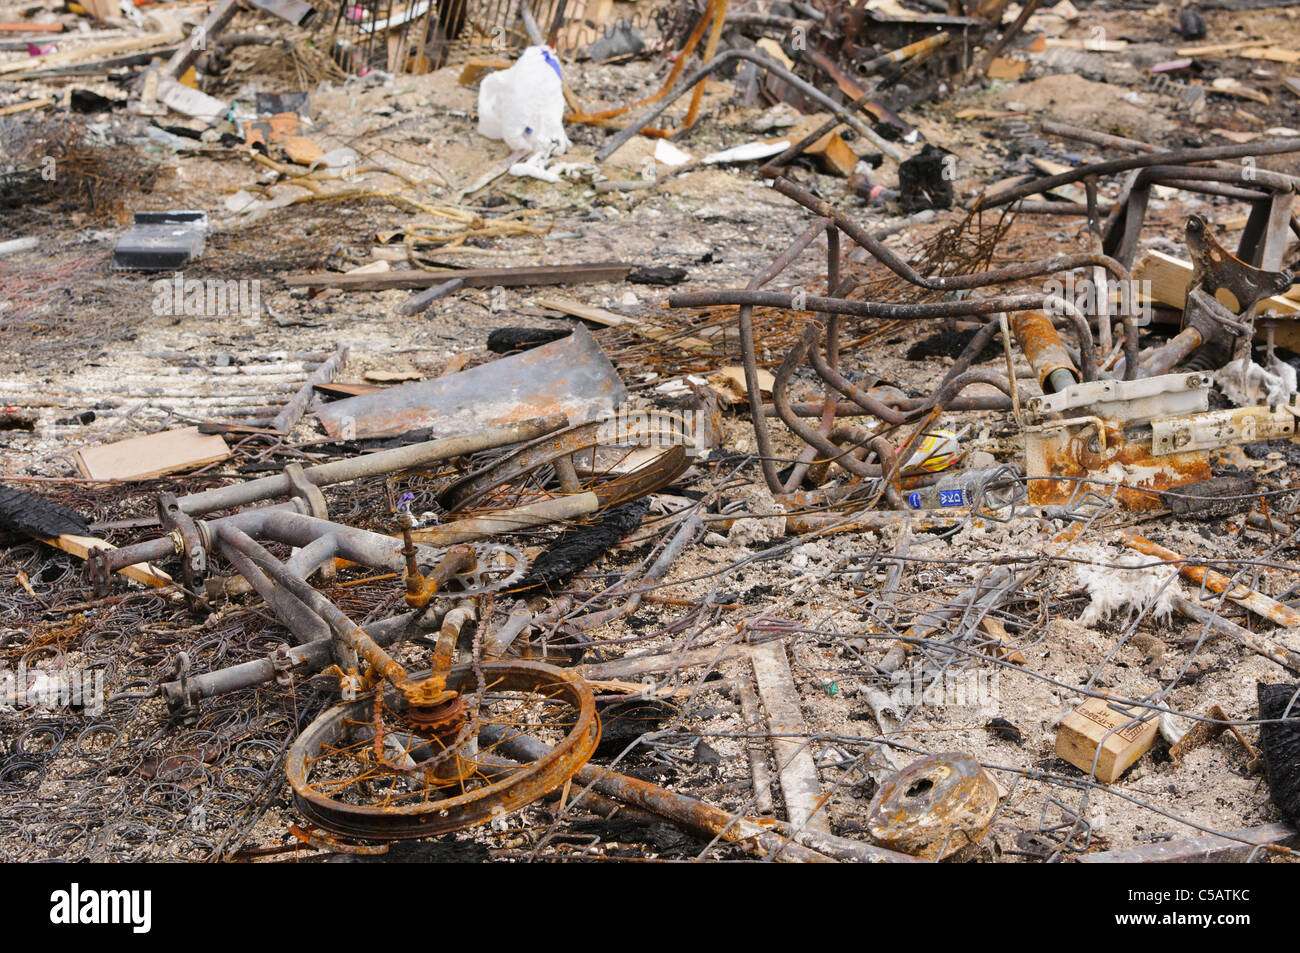 Various objects, including a bicycle, lying in the ashes after a fire. Stock Photo